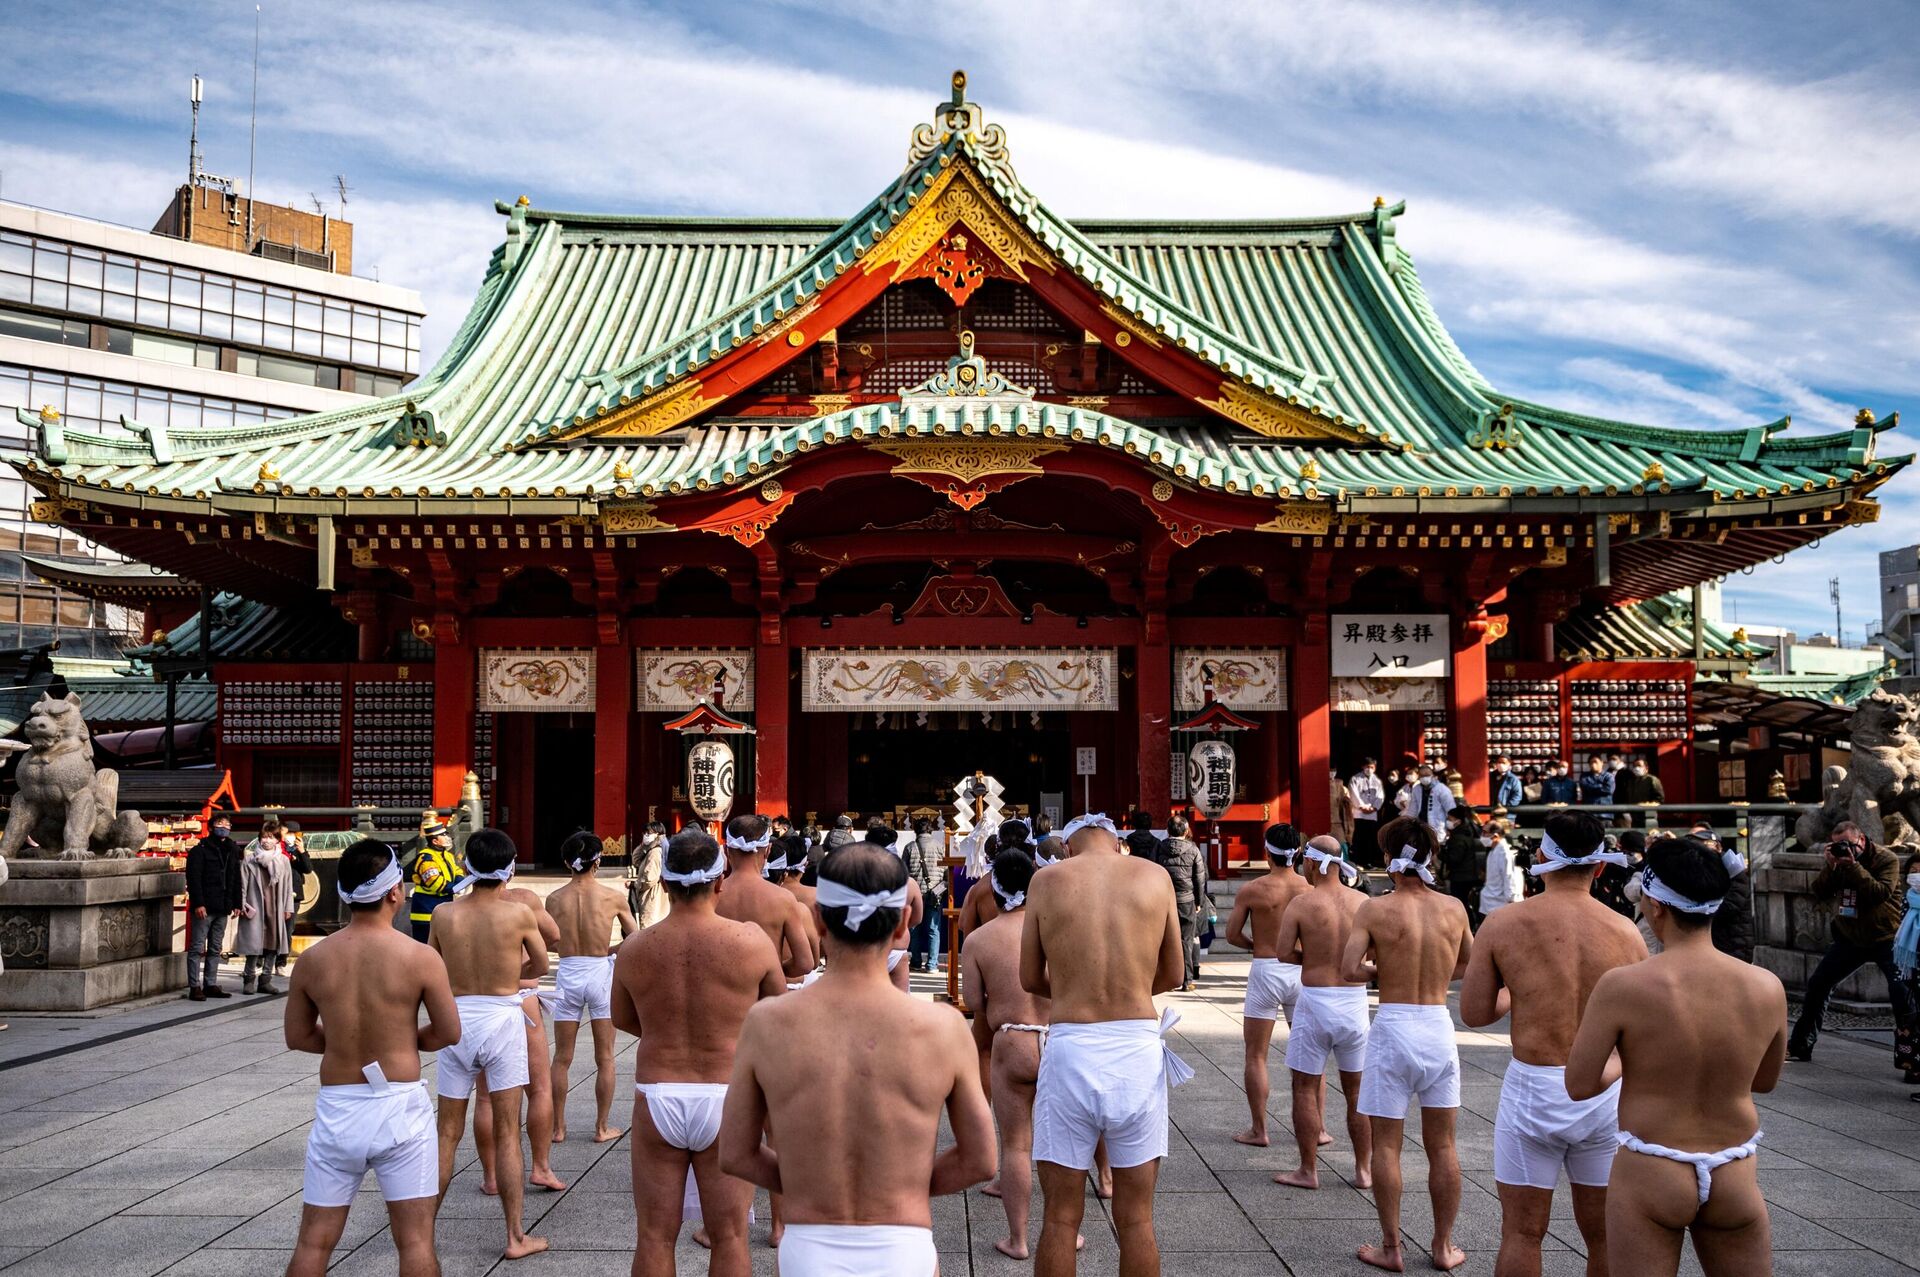 Shinto believers of the Kanda Myojin Shrine prepare to pray before a bath in cold water to purify their souls and bodies during a New Year ritual in Tokyo on January 15, 2022. (Photo by Philip FONG / AFP) - Sputnik International, 1920, 24.12.2022